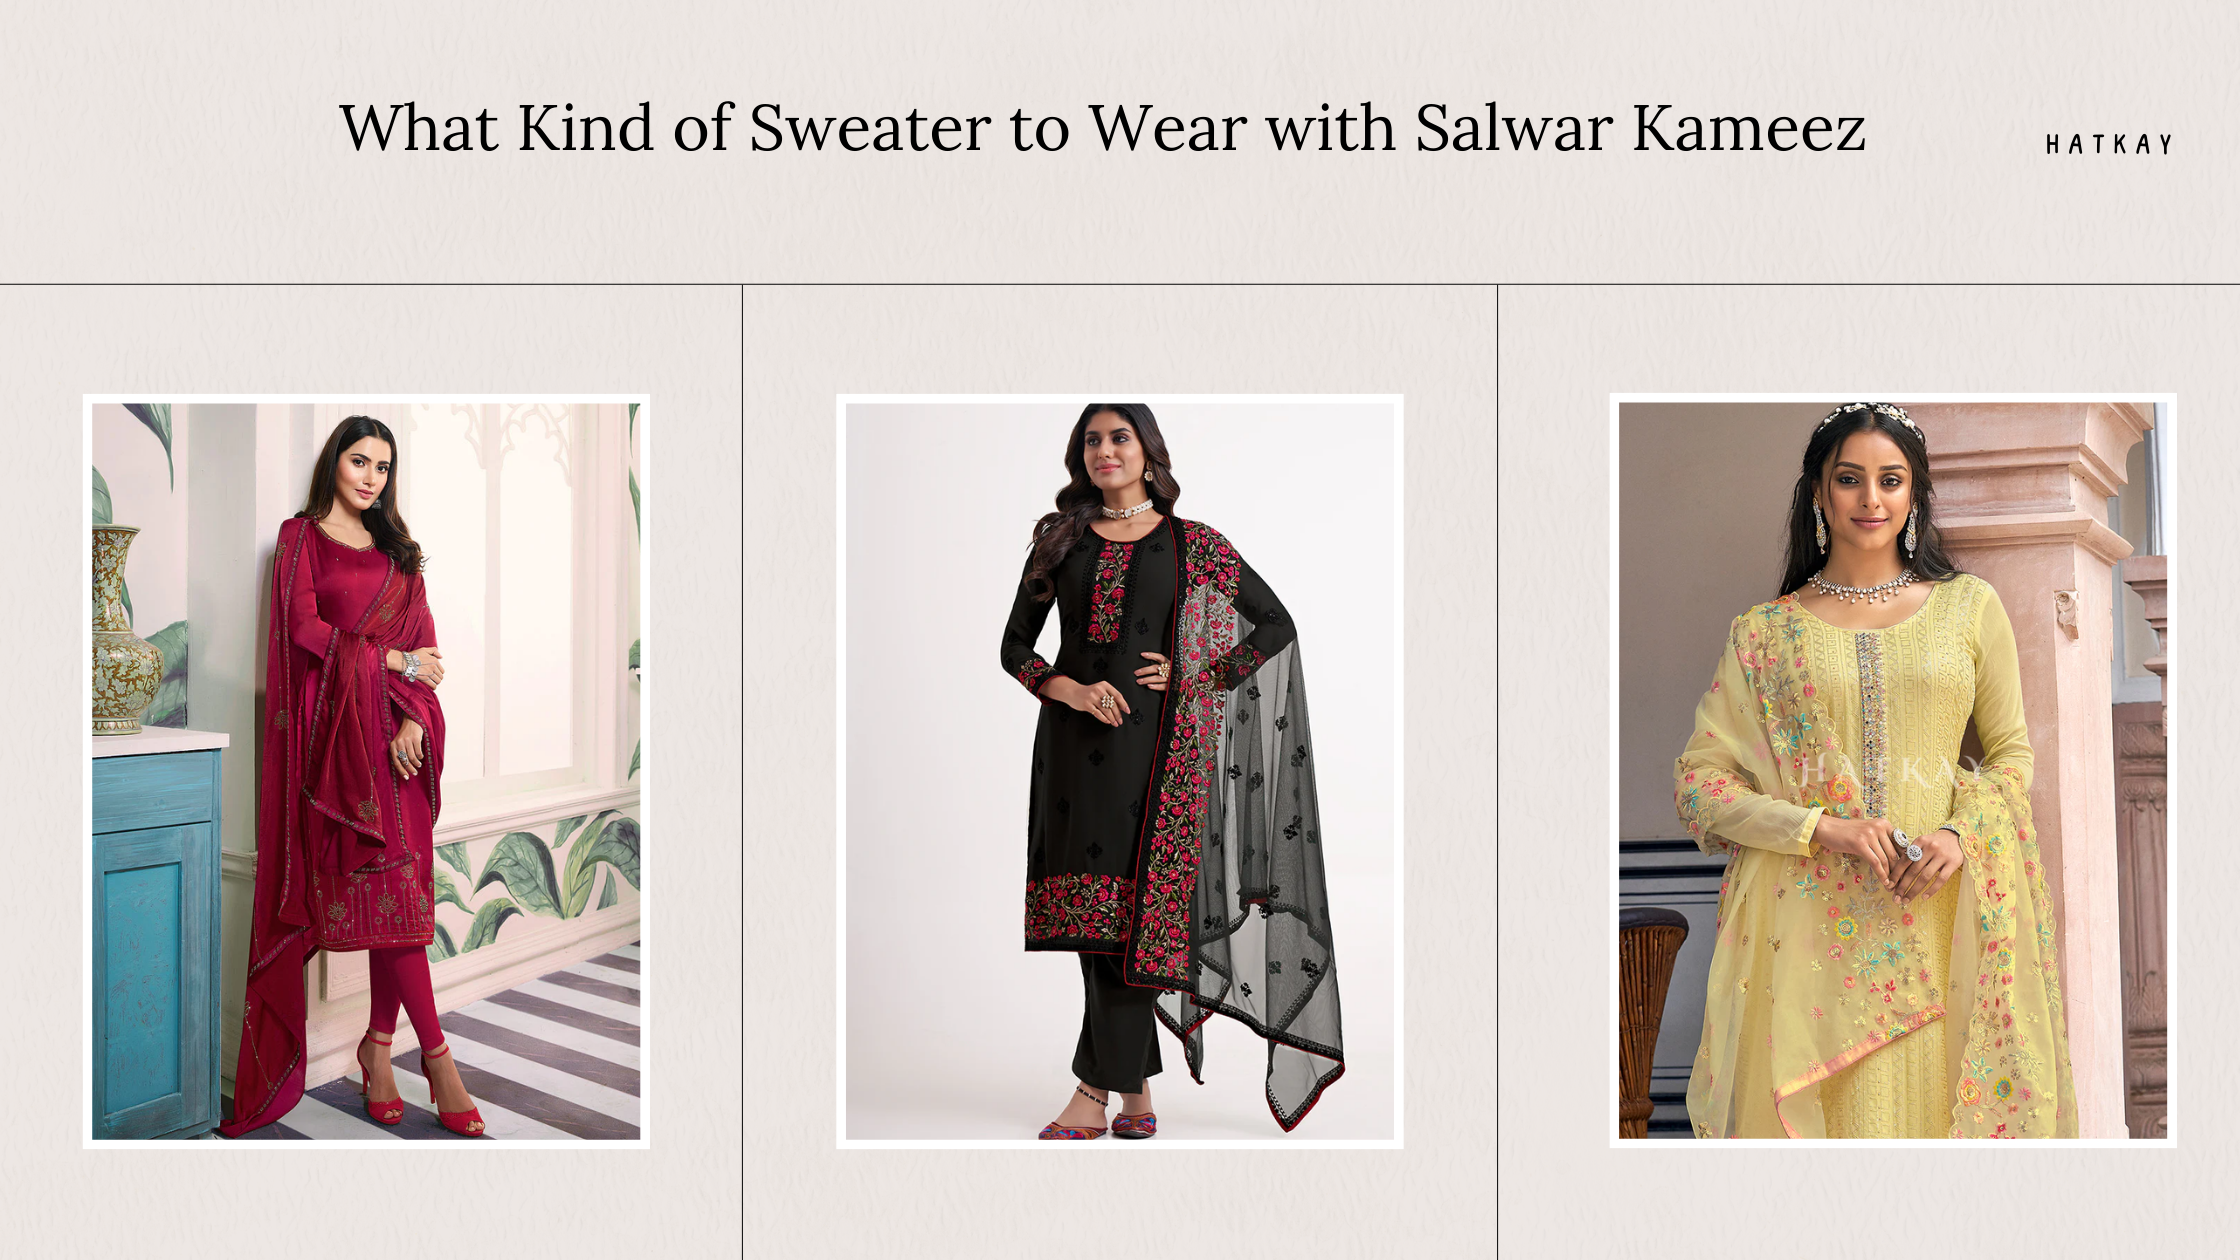 What Kind of Sweater to Wear with Salwar Kameez